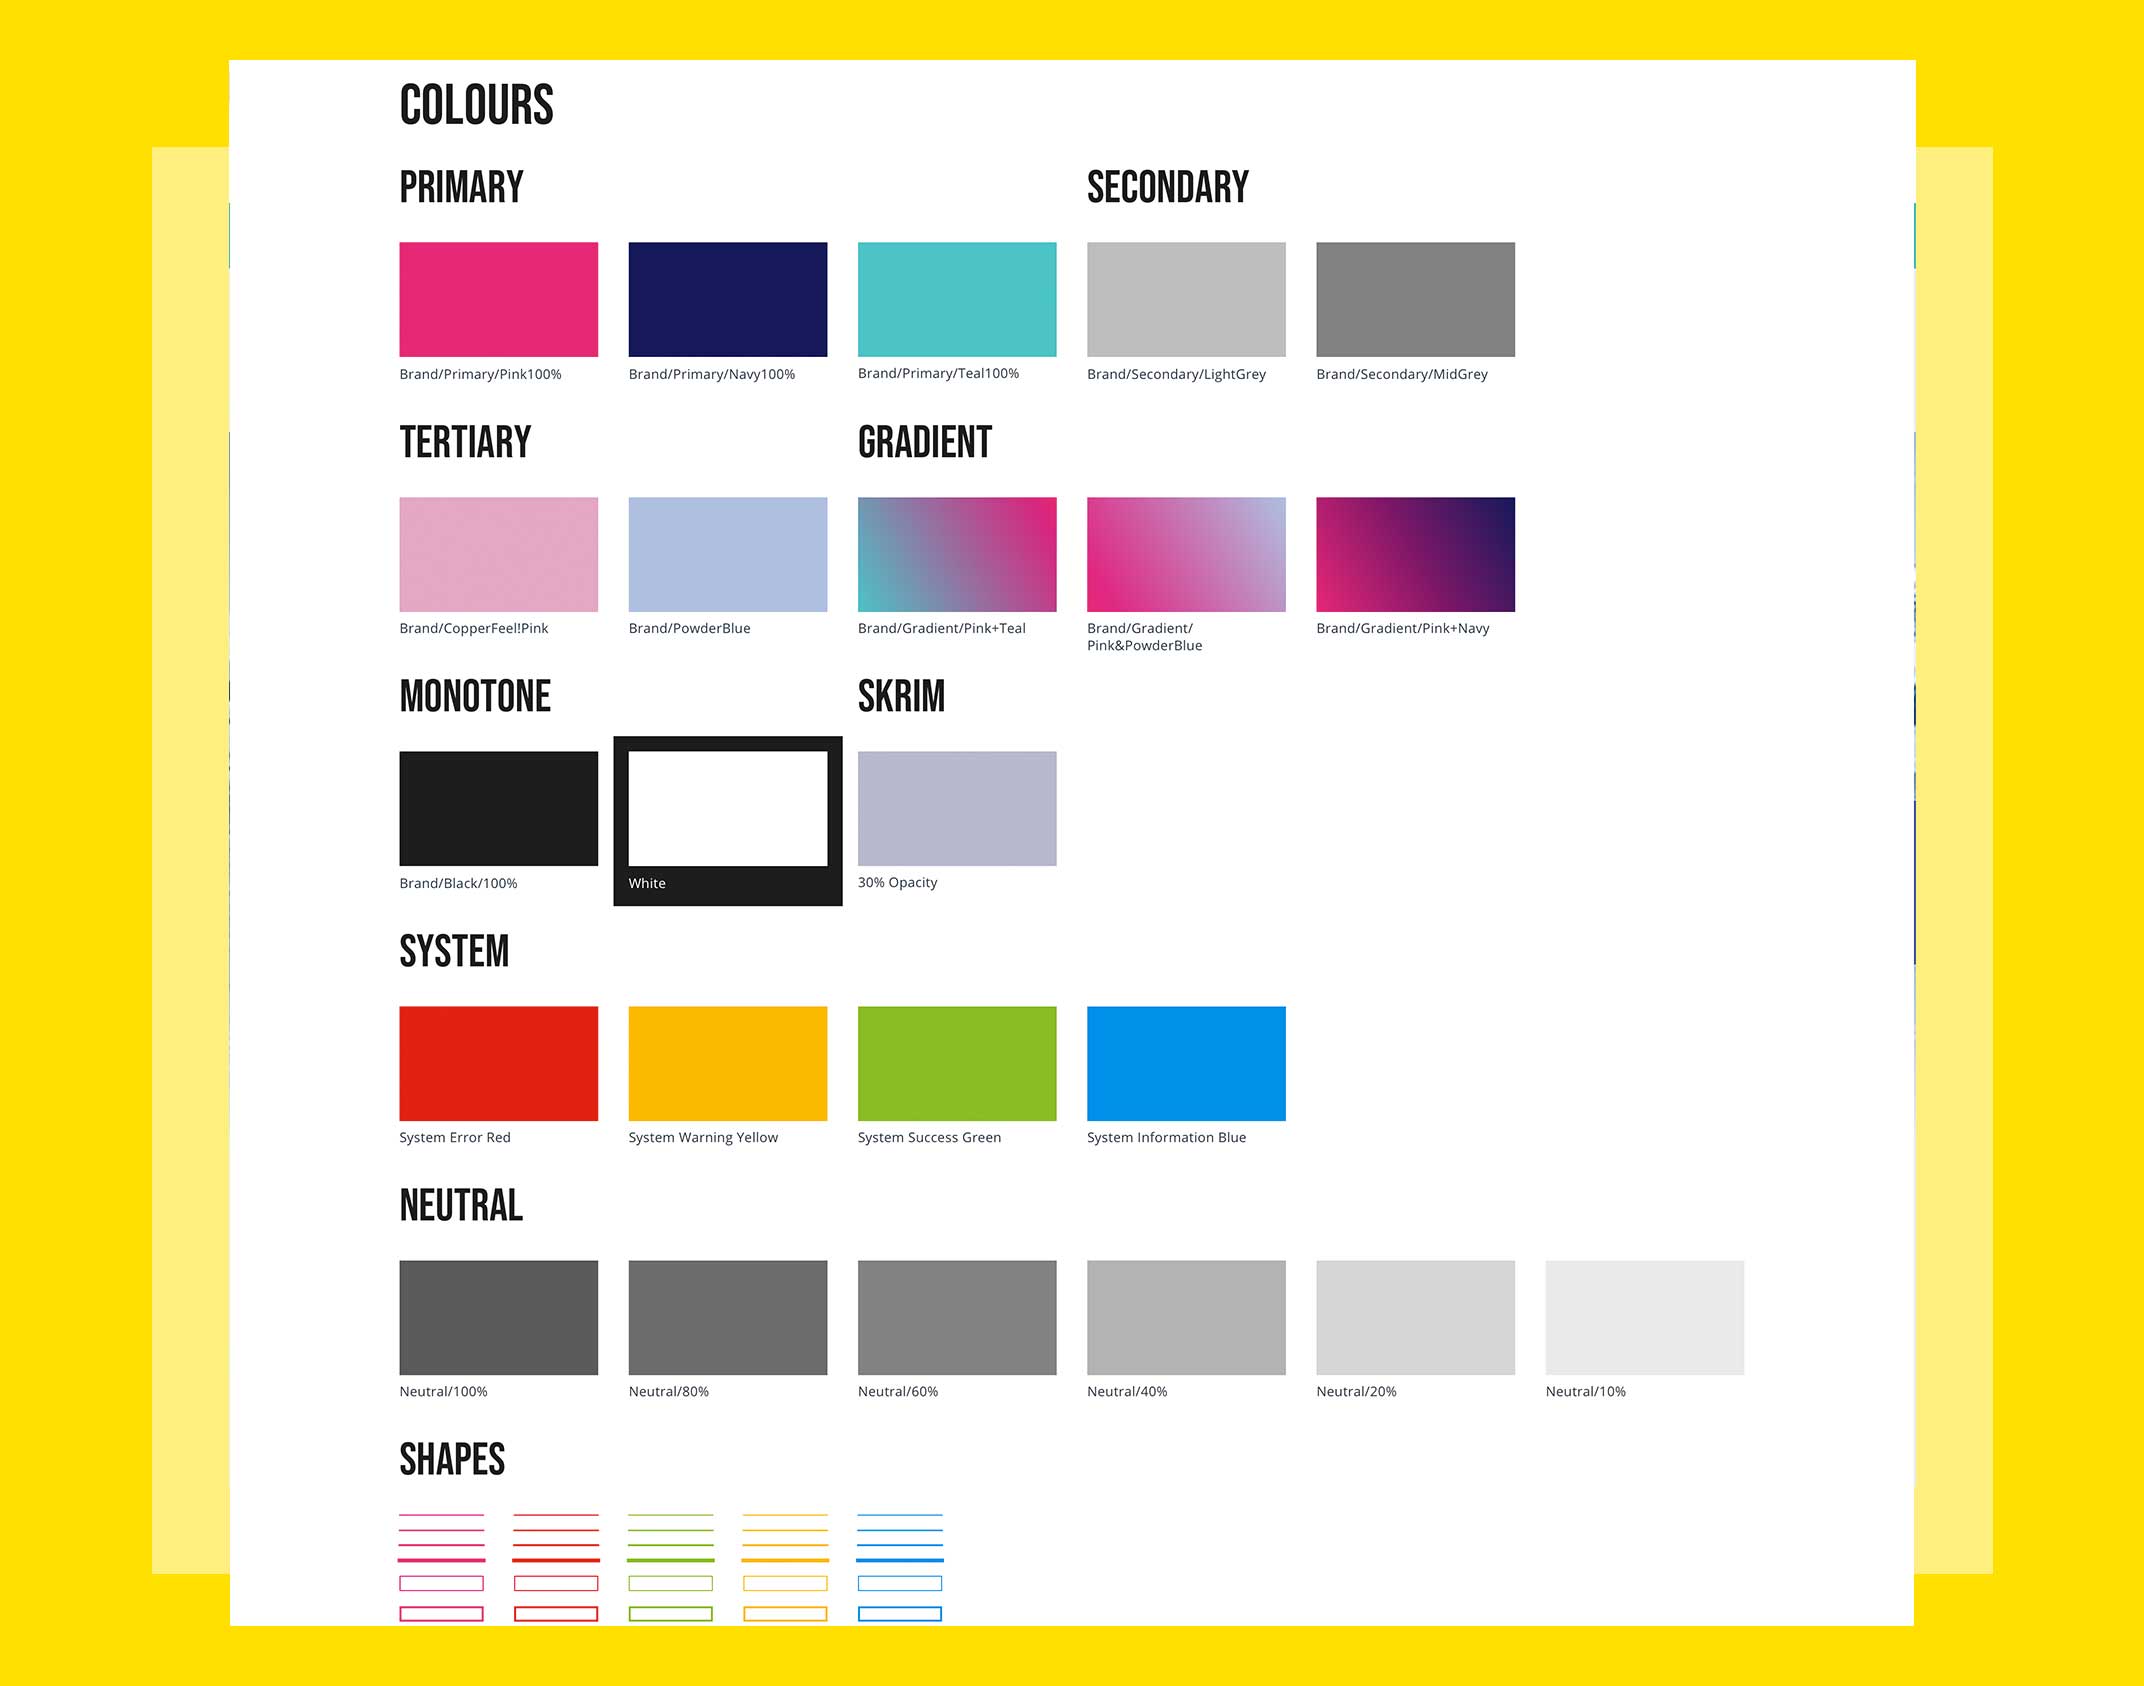 A screenshot of design visuals showing definition of colours for coppafeel's palette: Numerous boxes with different colours and textures